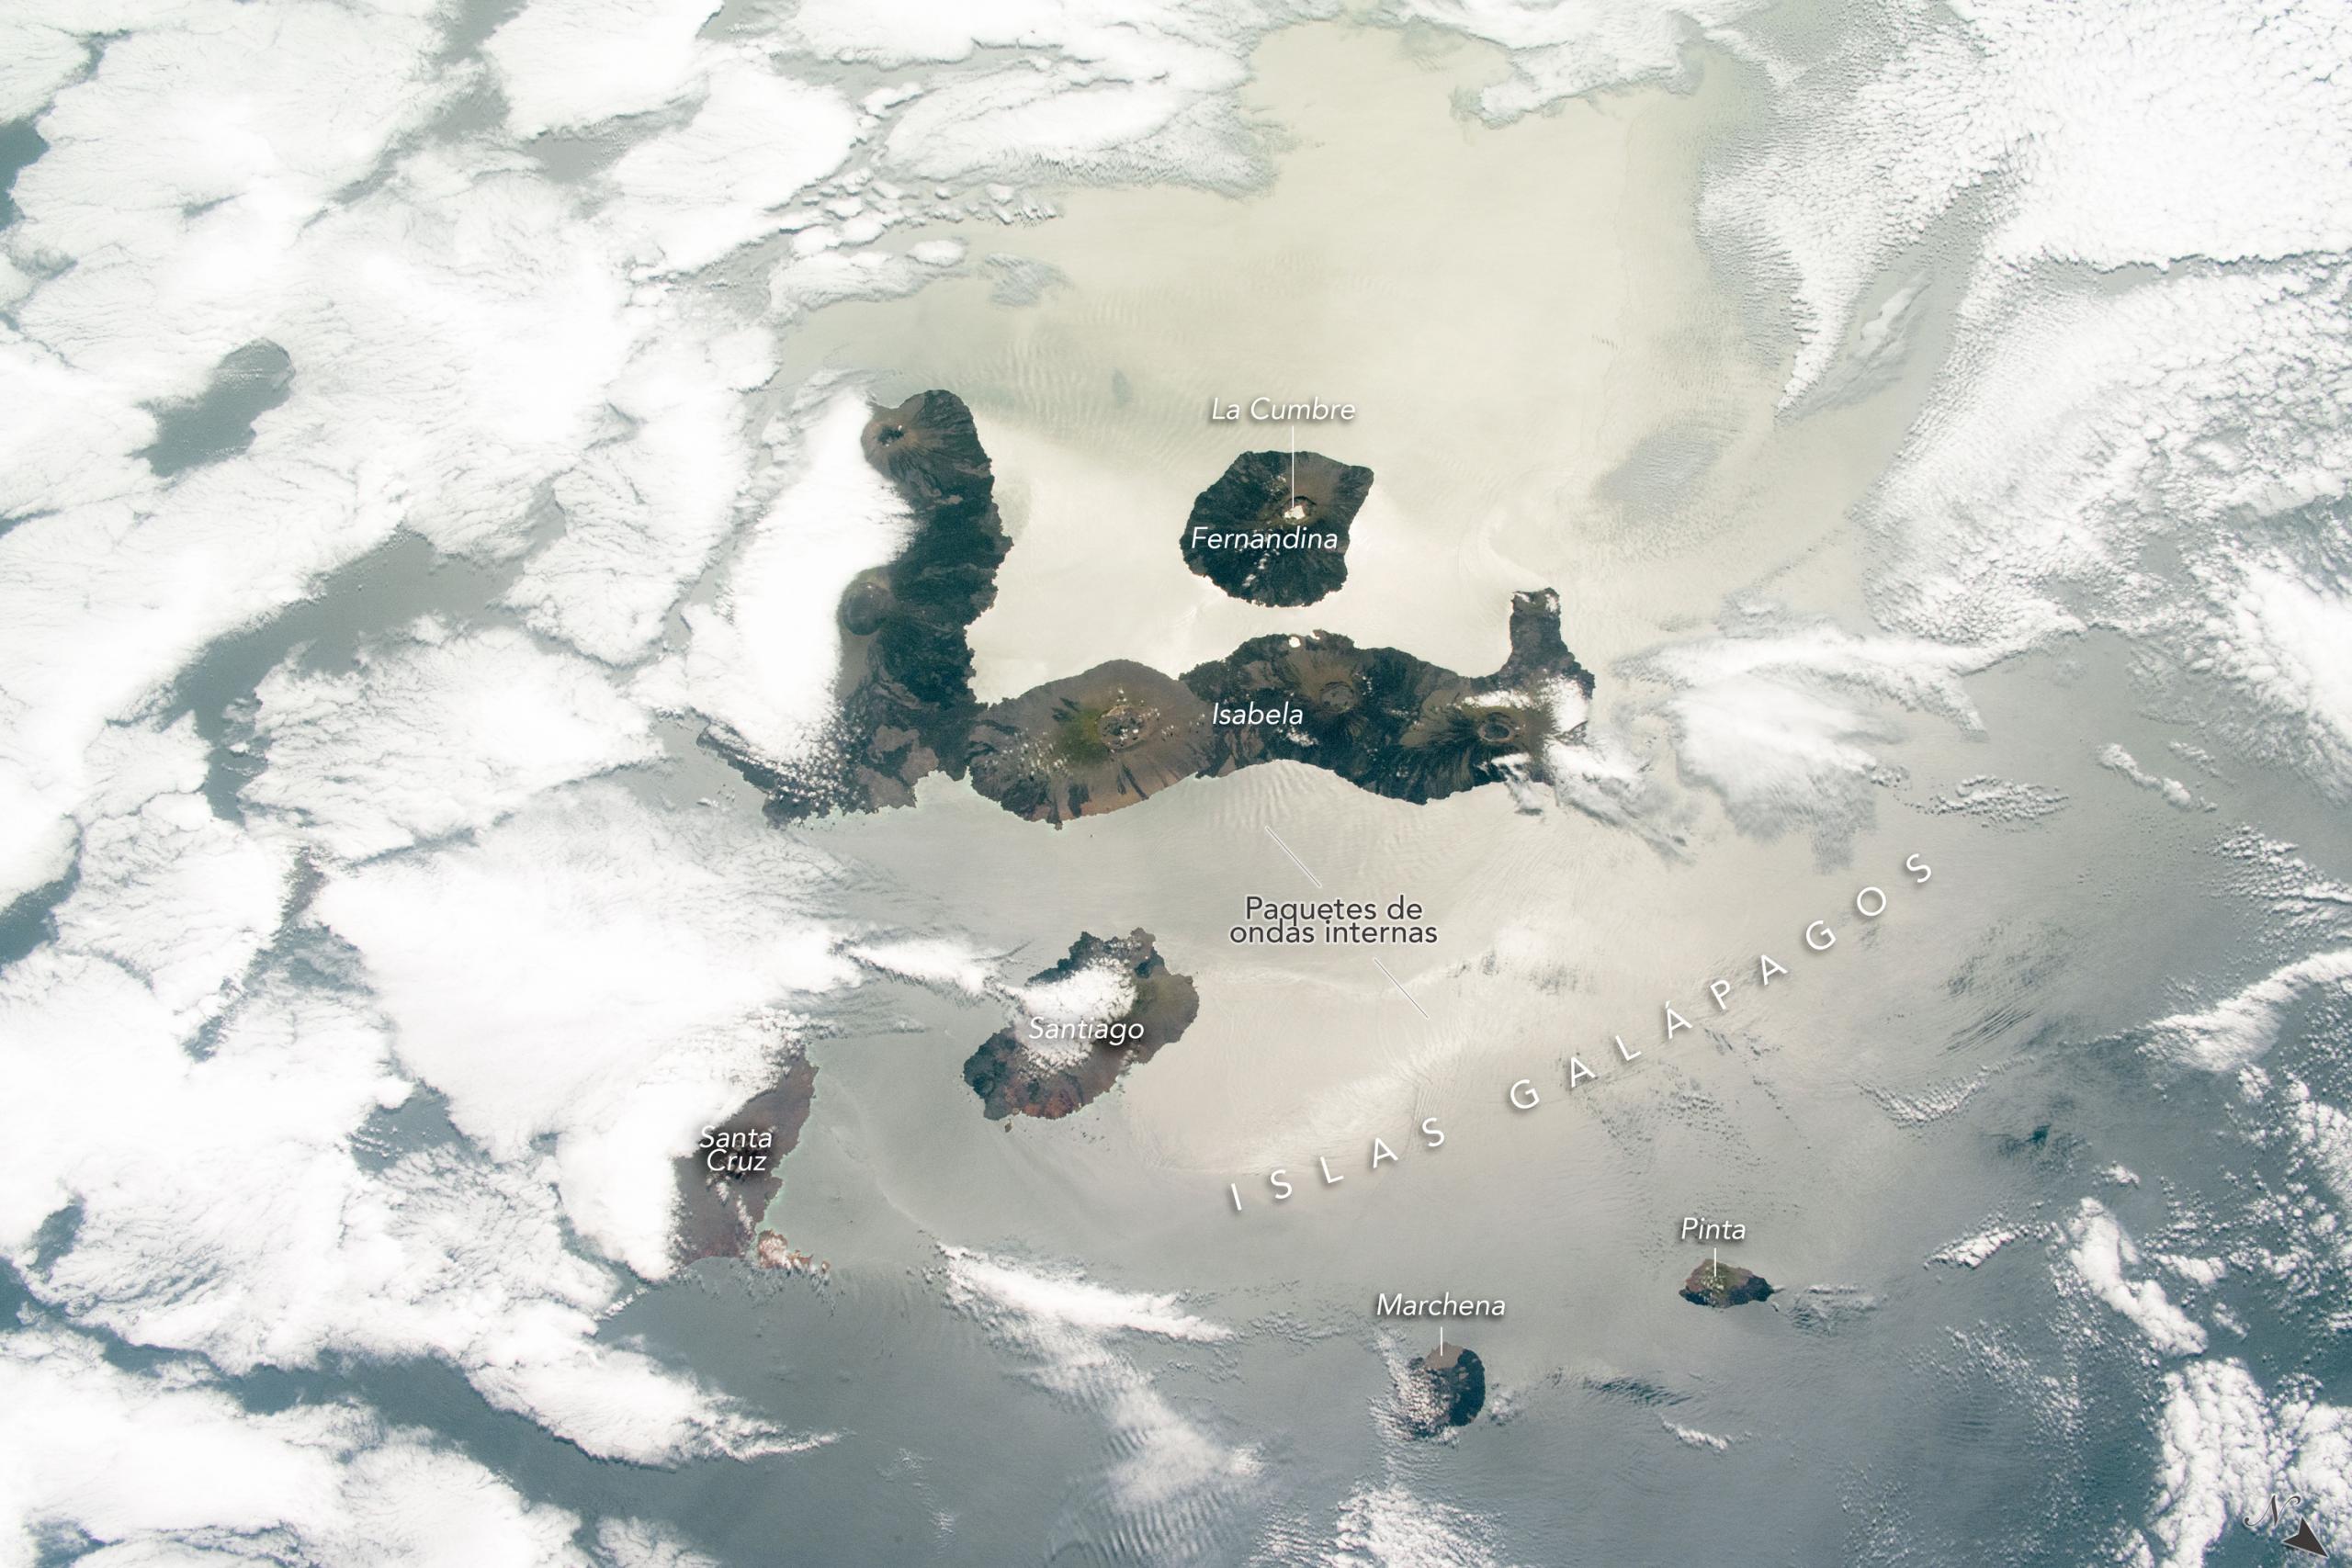 Galapagos Islands from the space station. 